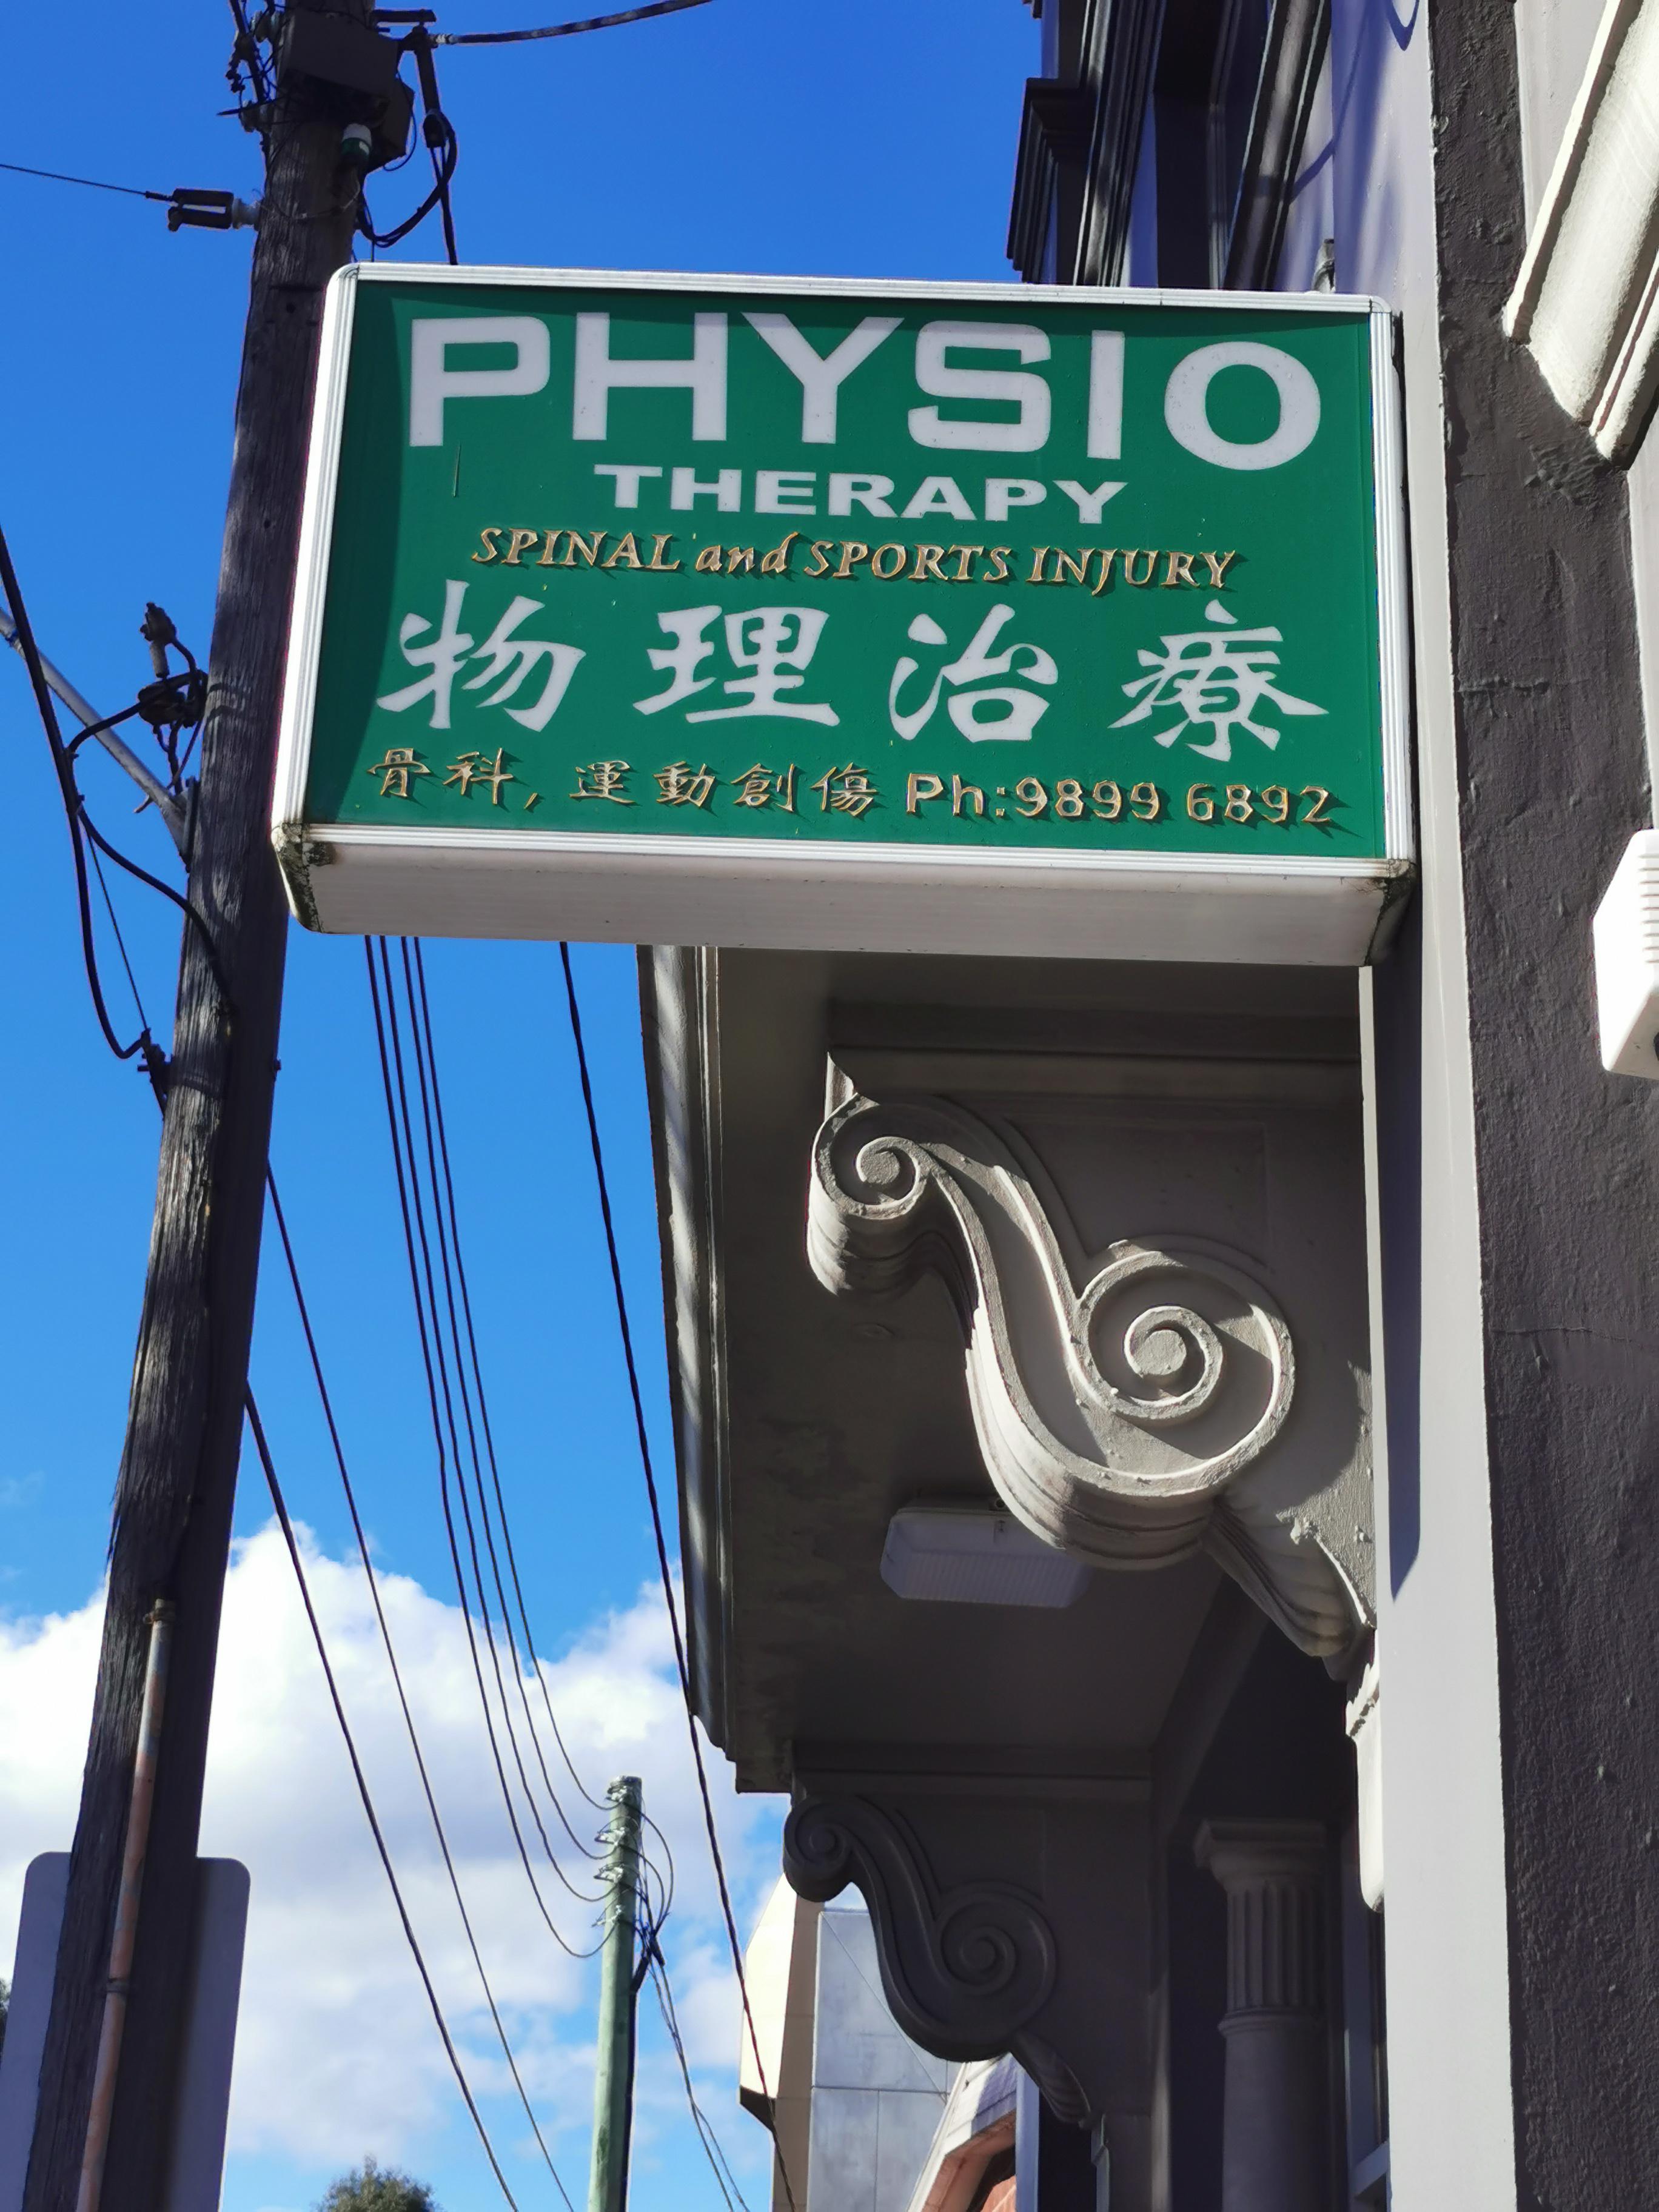 Victorian Spinal, Sports Physiotherapy and Acupuncture clinic Box Hill (03) 9899 6892